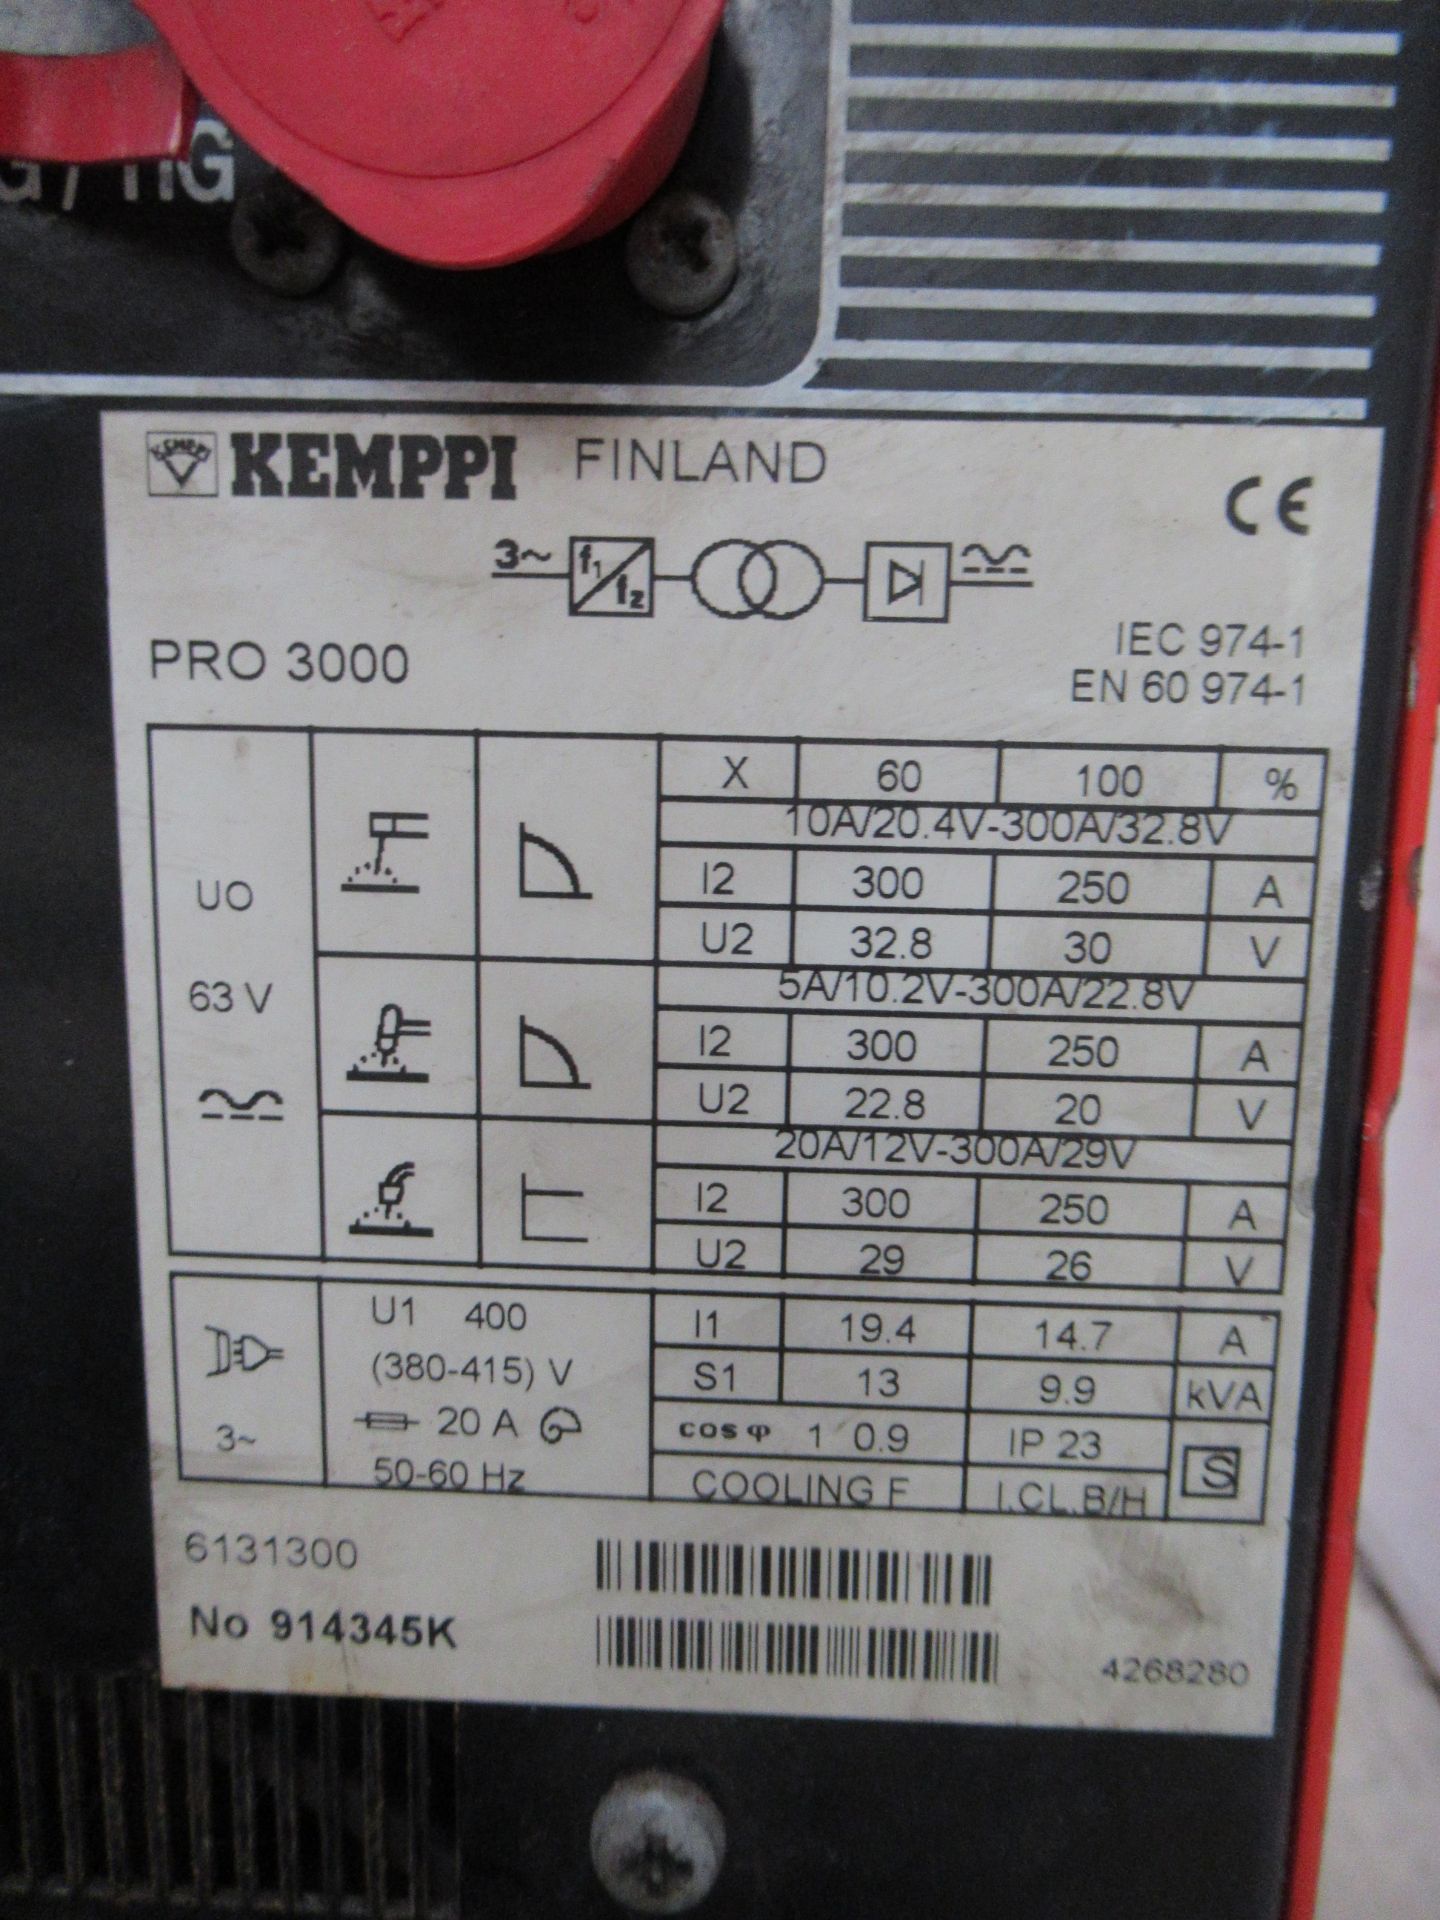 Kemppi ML synergic promig 520R welder with Kemppi Pro 3000 power source, c/w leads and torch - Image 7 of 8